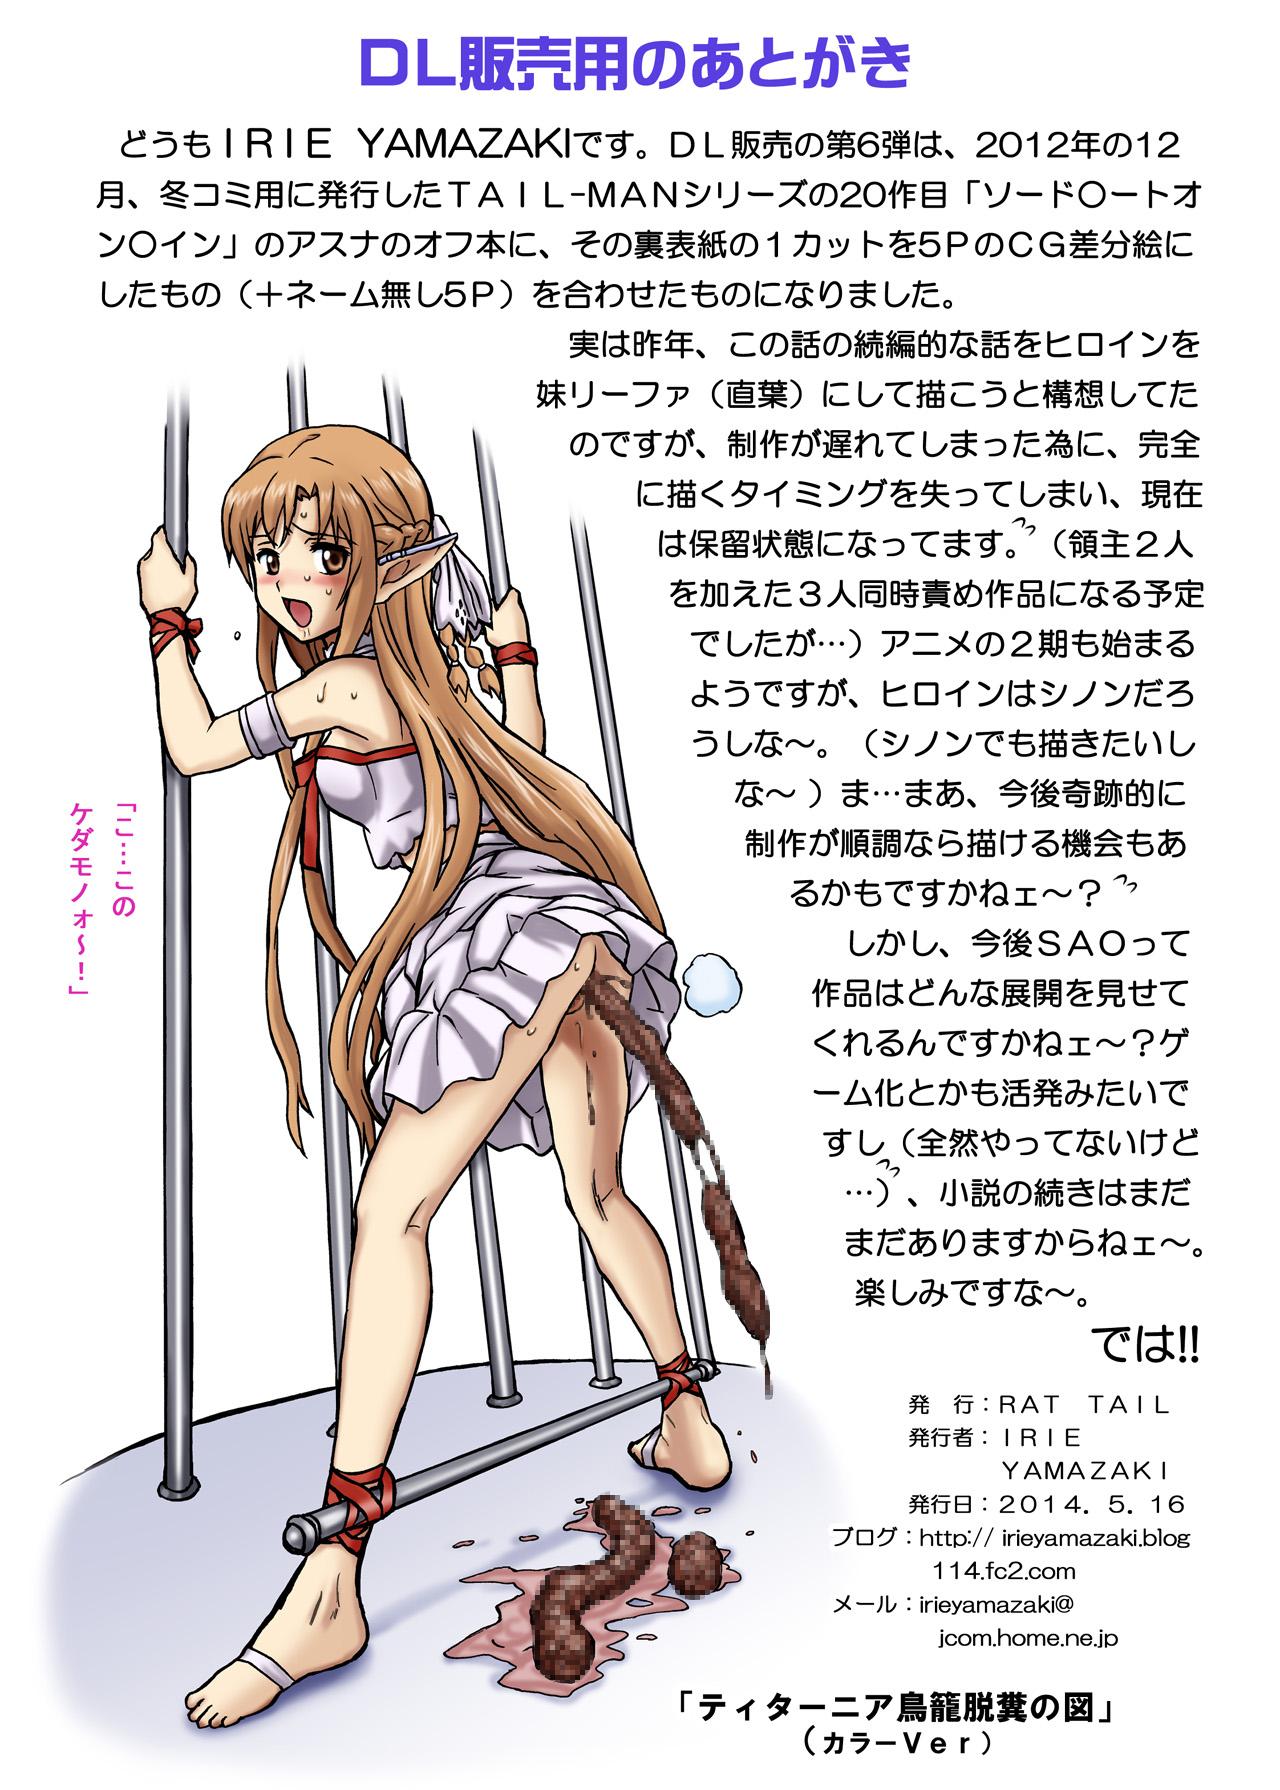 Culo TAIL-MAN ASUNA BOOK - Sword art online Caught - Page 45